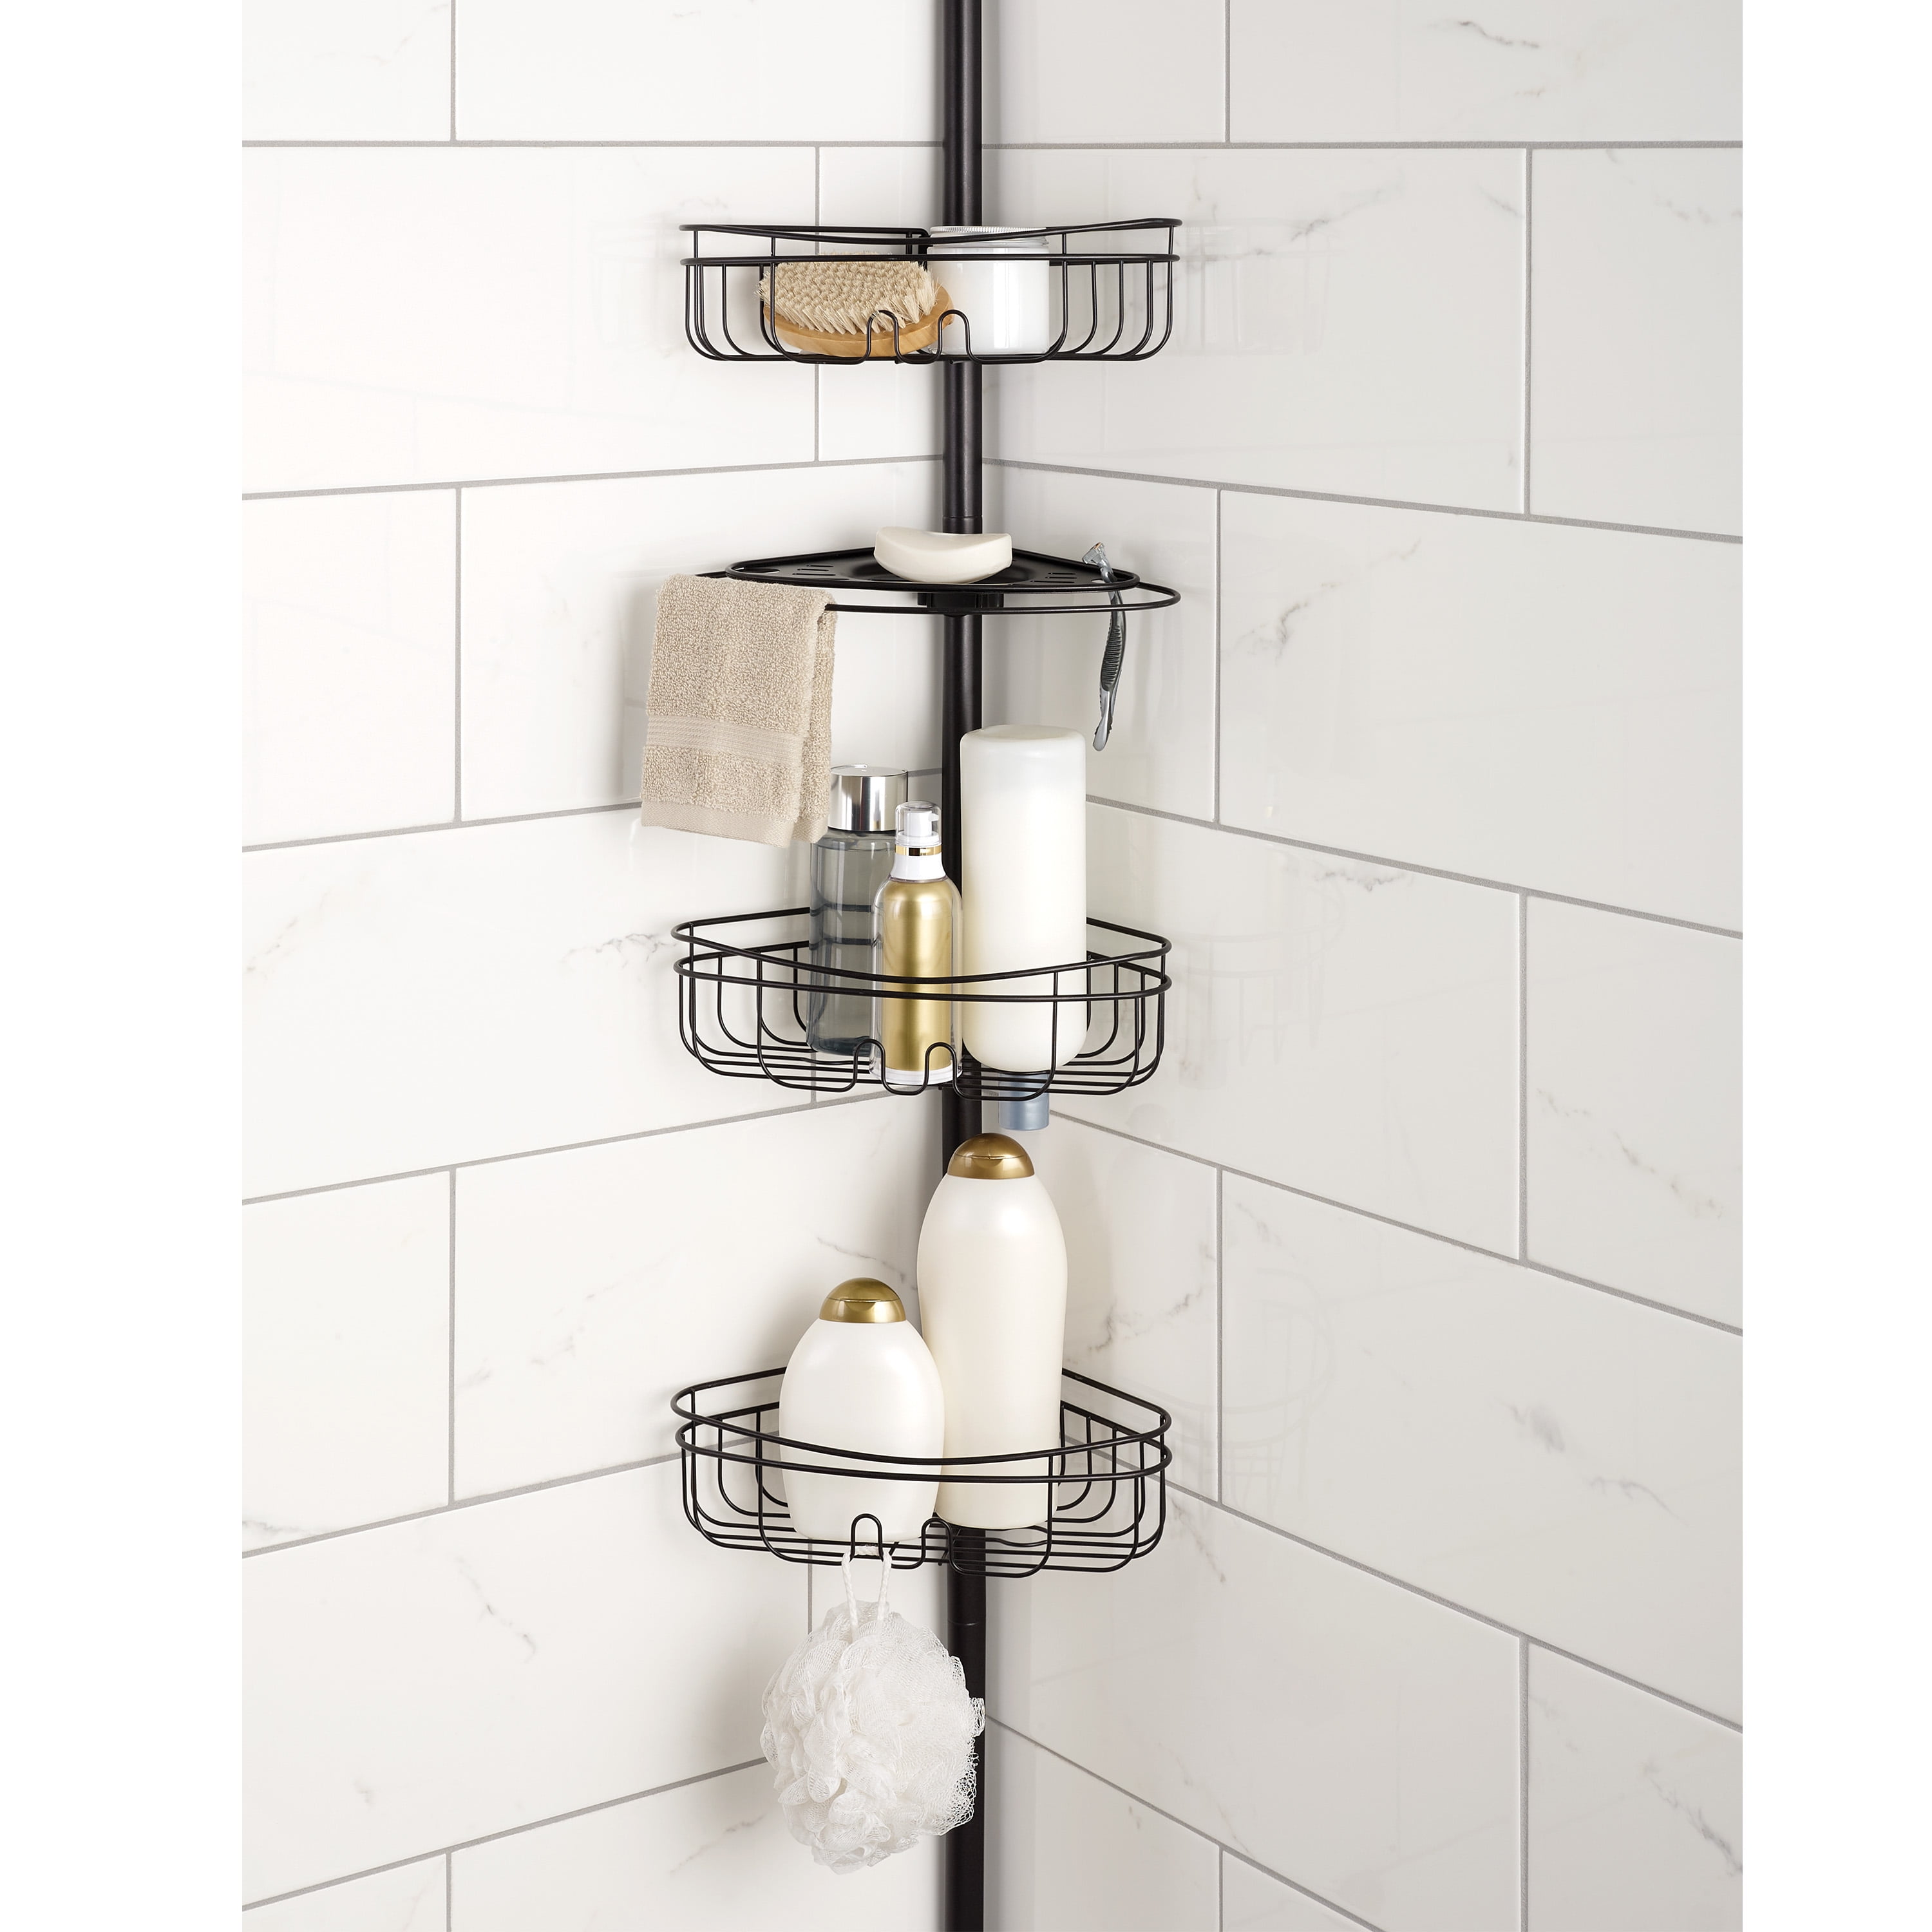 Mainstays 3-Shelf Tension Pole Shower Caddy, Oil-Rubbed Bronze